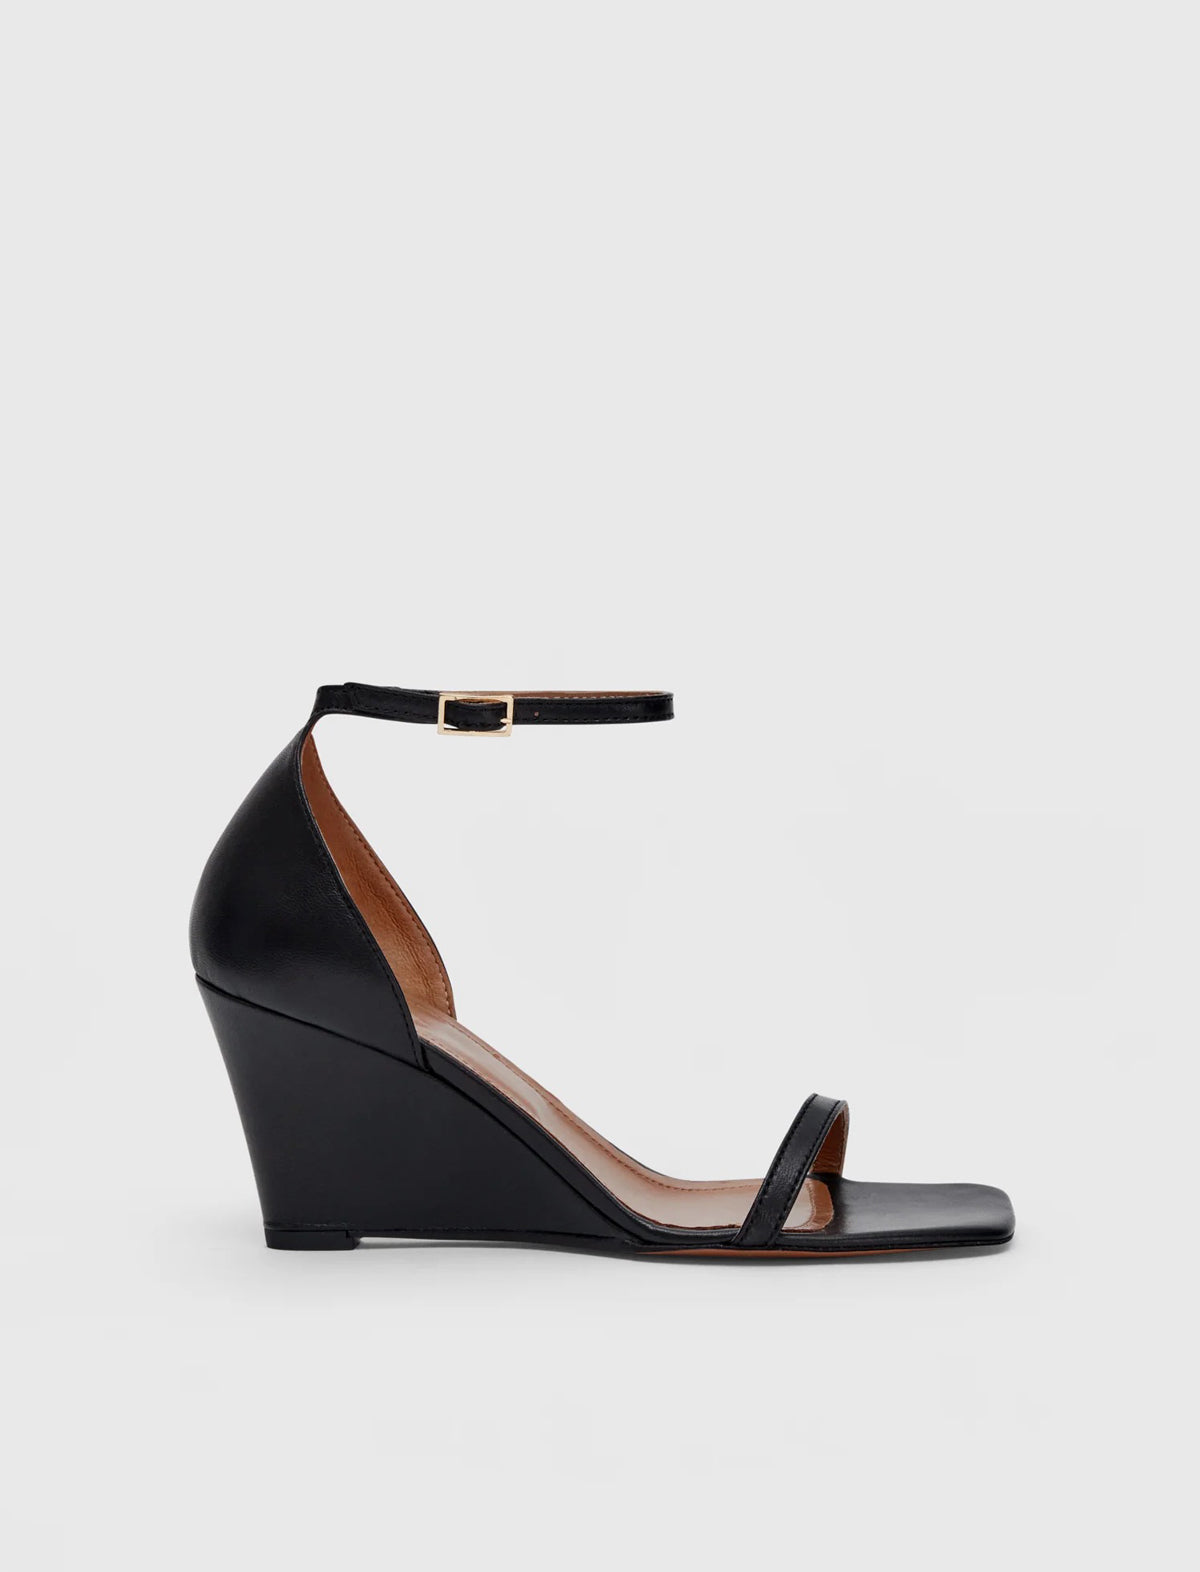 ATP Atelier Morcone Nappa Wedge Sandals in Black